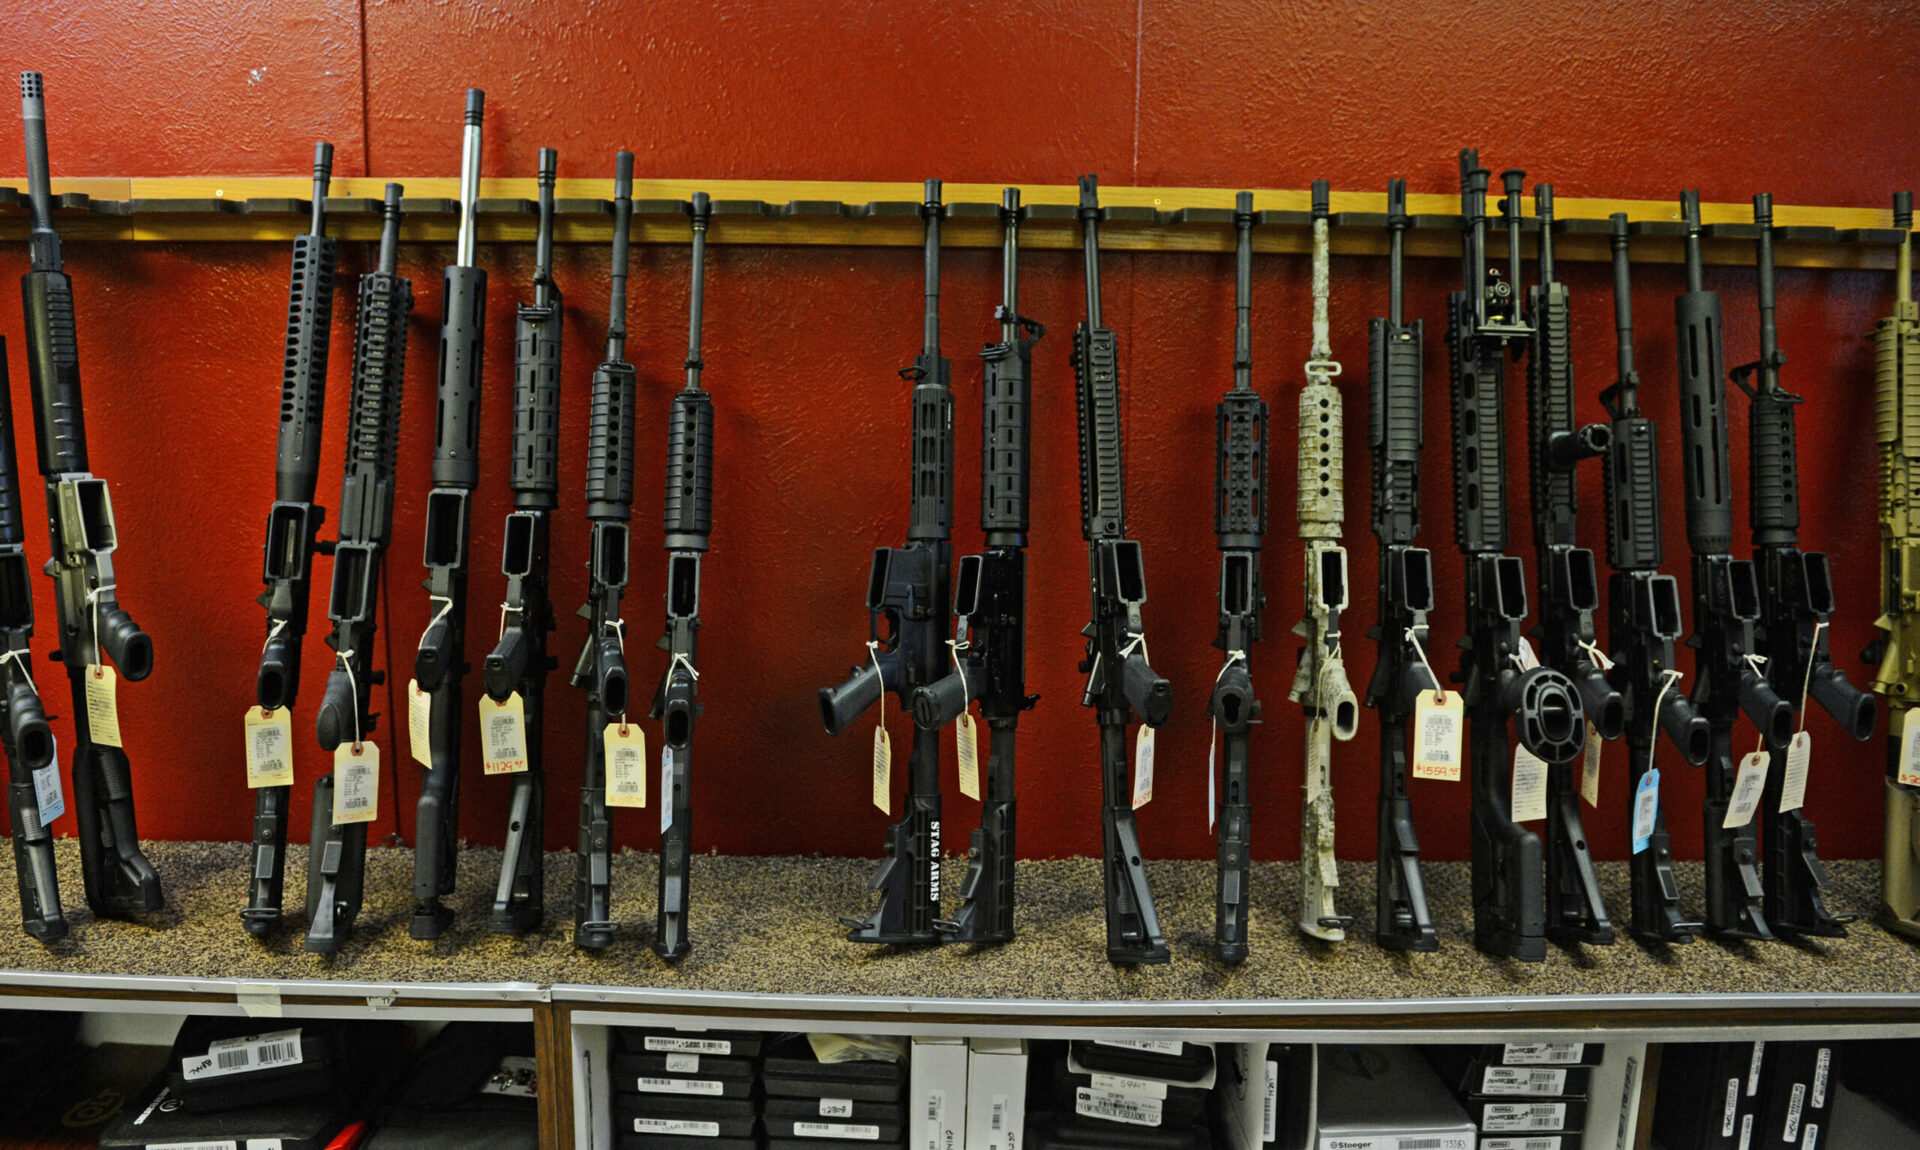 Colorado House passes bill to ban sale, purchase of “assault weapons,” sending measure to Senate